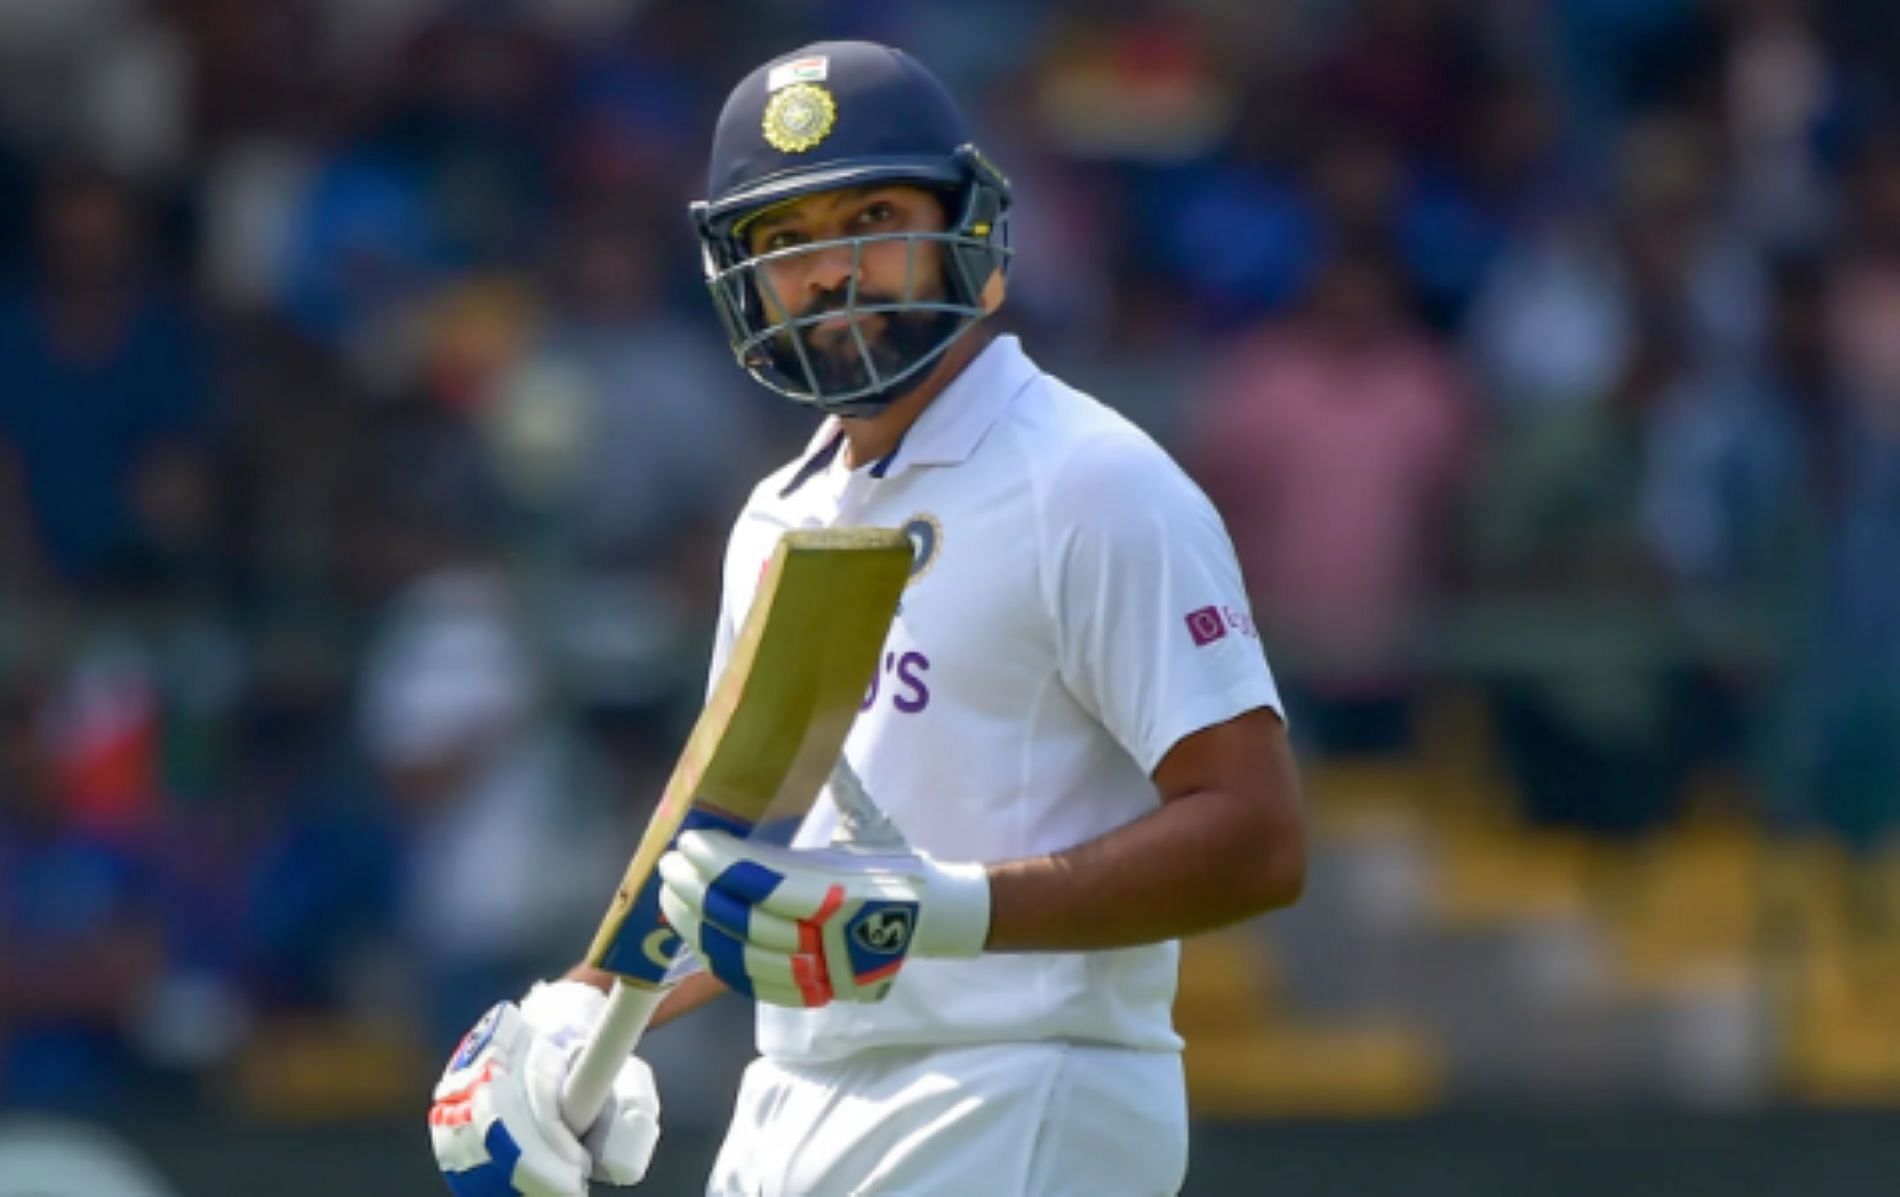 Rohit has been in sensational Test form this year